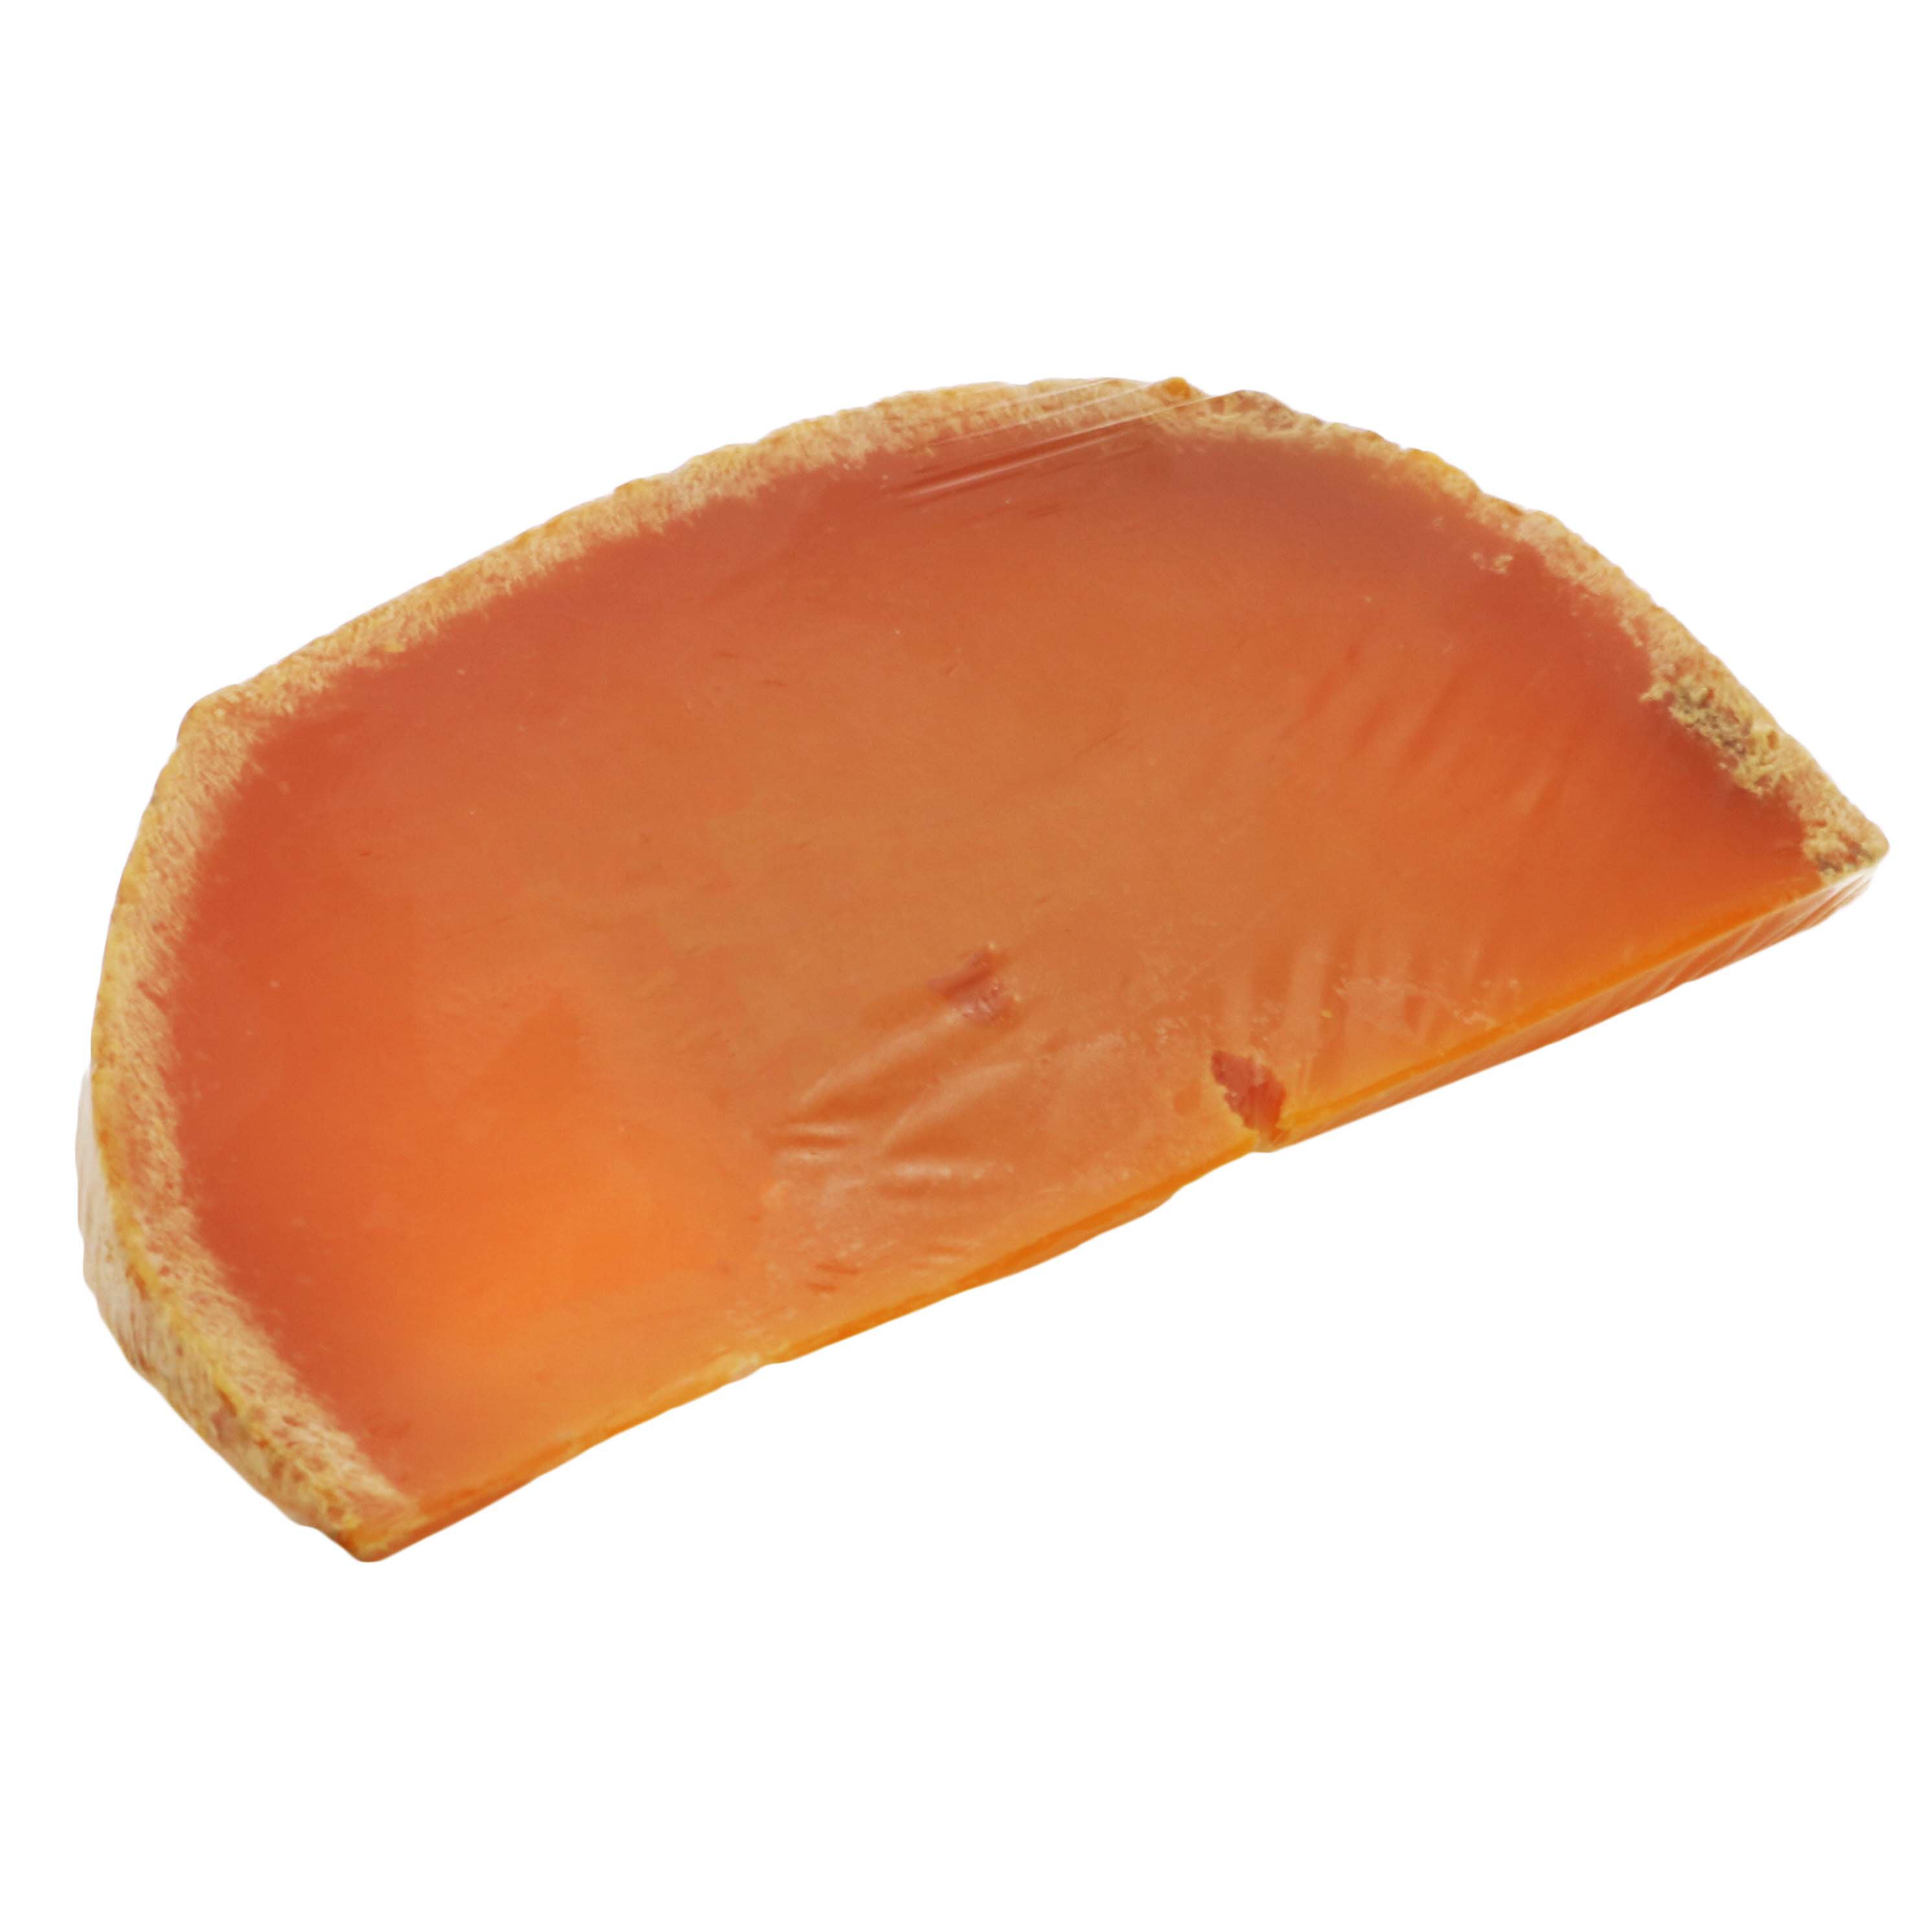 Isigny Mimolette Cheese Shop Cheese At H E B 